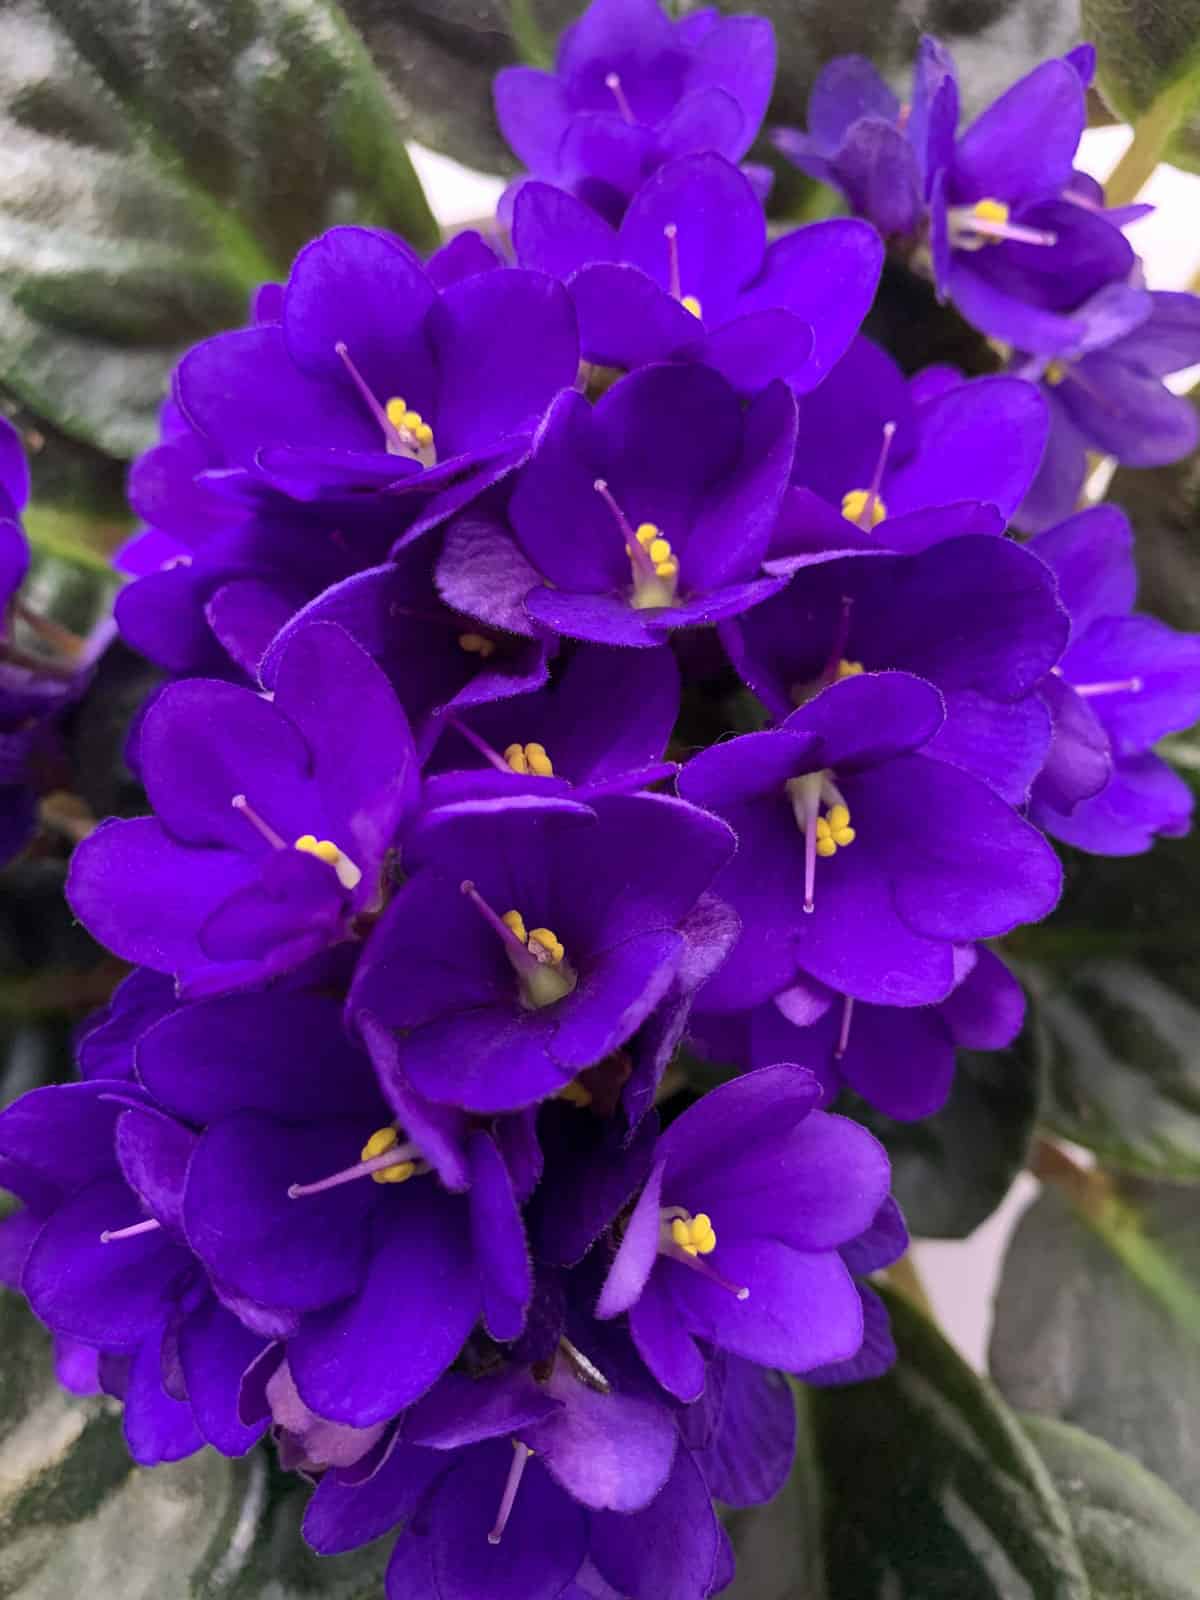 Pure bright purple leaves of an African Violet flower